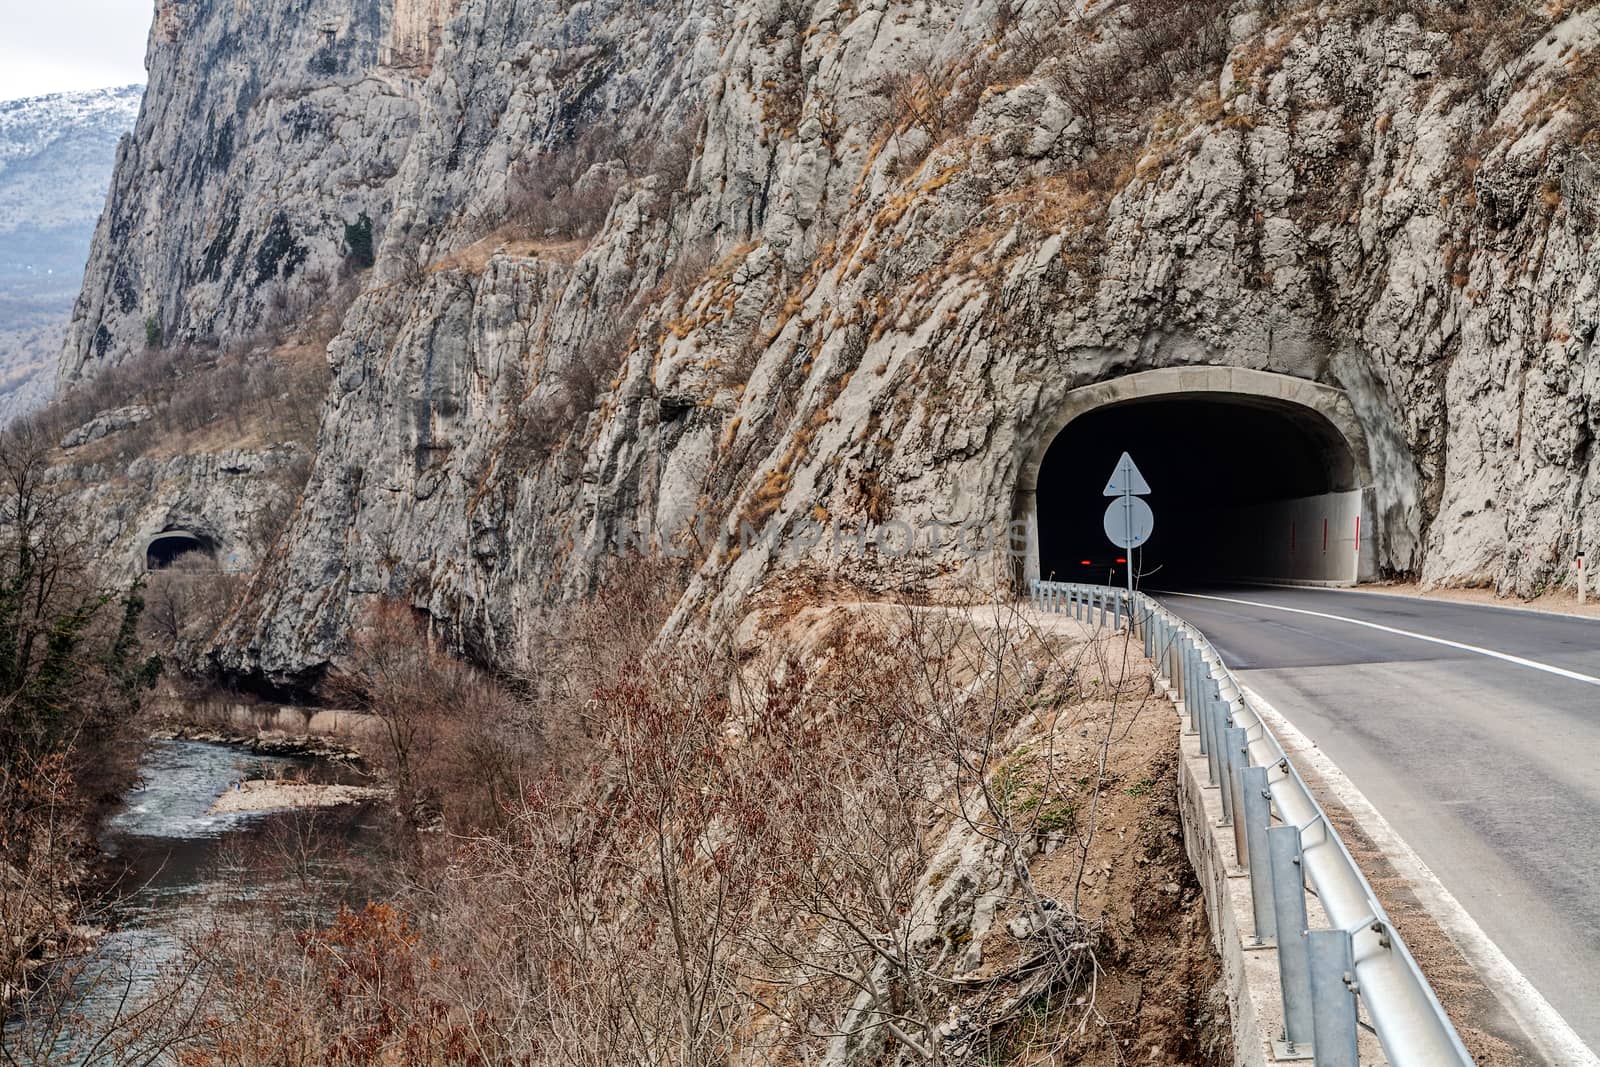 Tunnel on the road in the canyon during the winter on a cloudy day